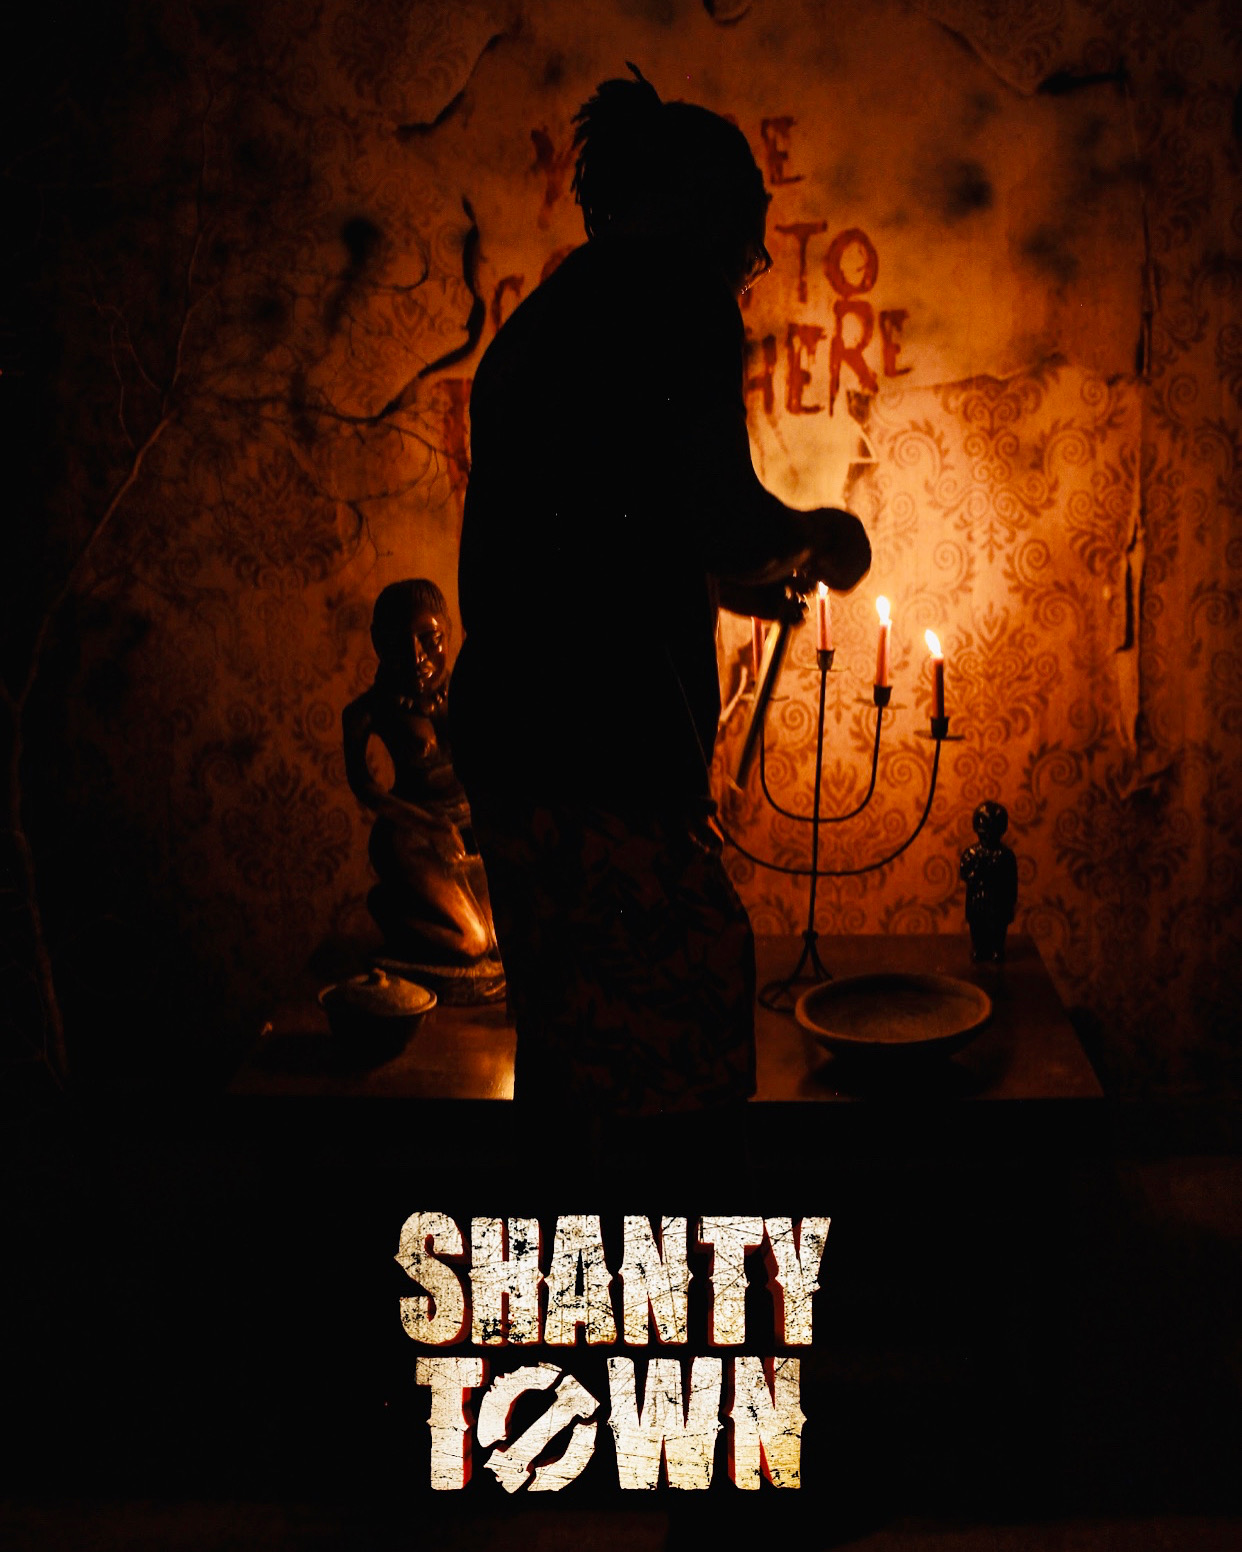 C4F87723 E3D2 4902 92C4 16EBD5C8FD1E - “Shanty Town” Acquired By Netflix As 6 Part Original Series, To Globally Launch On January 20th 2023